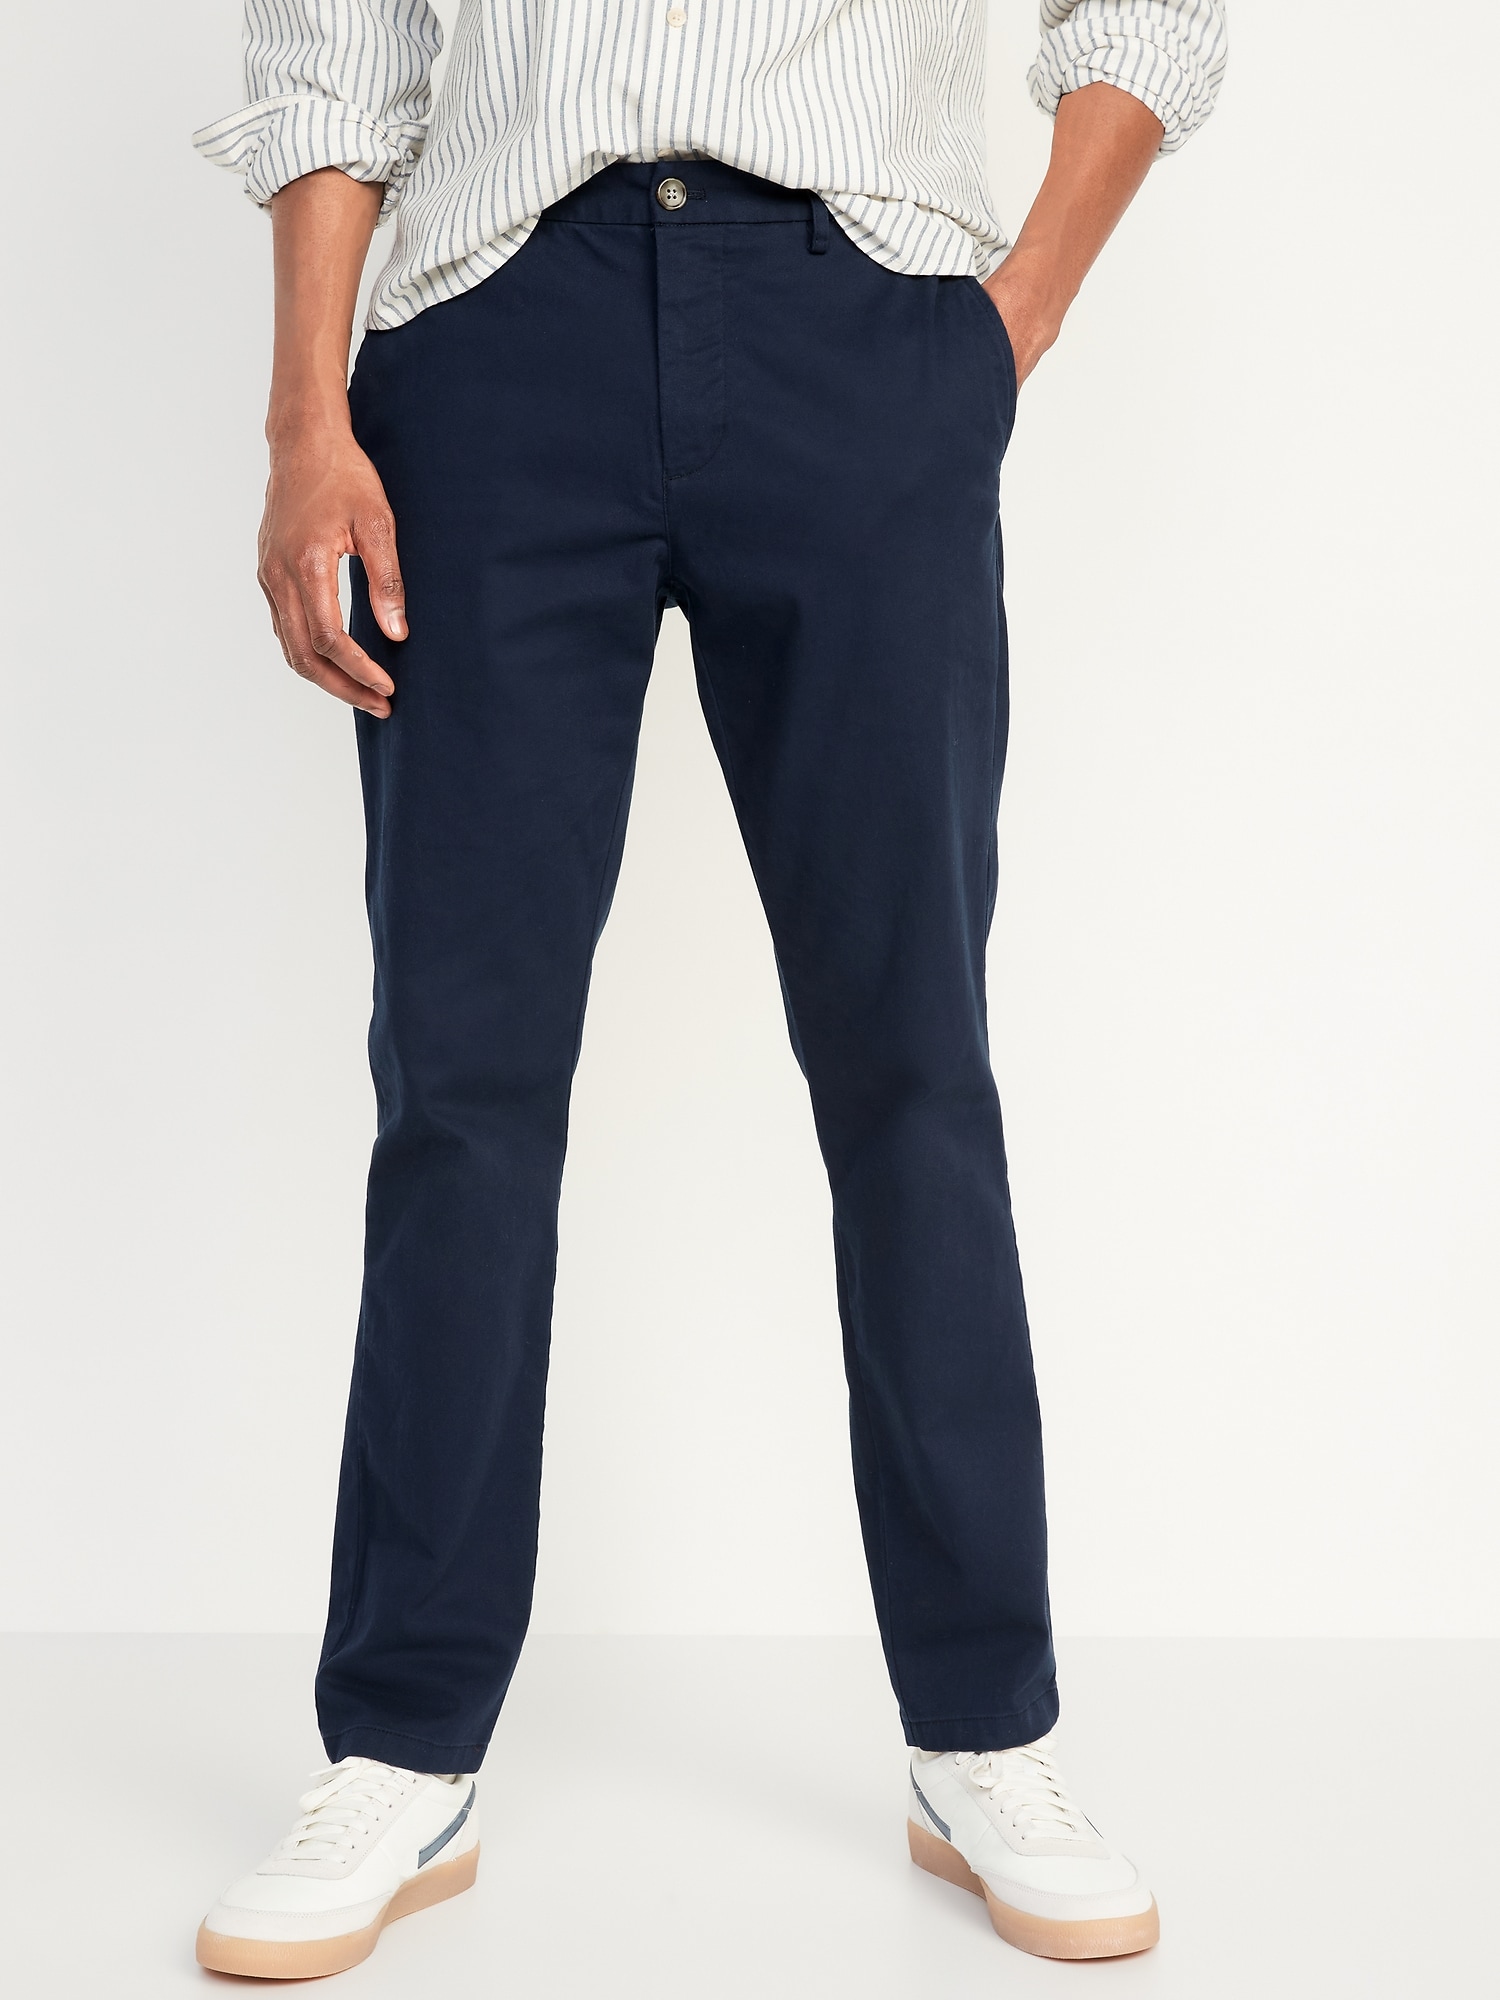 Old Navy Slim Built-In Flex Rotation Chino Pants blue. 1